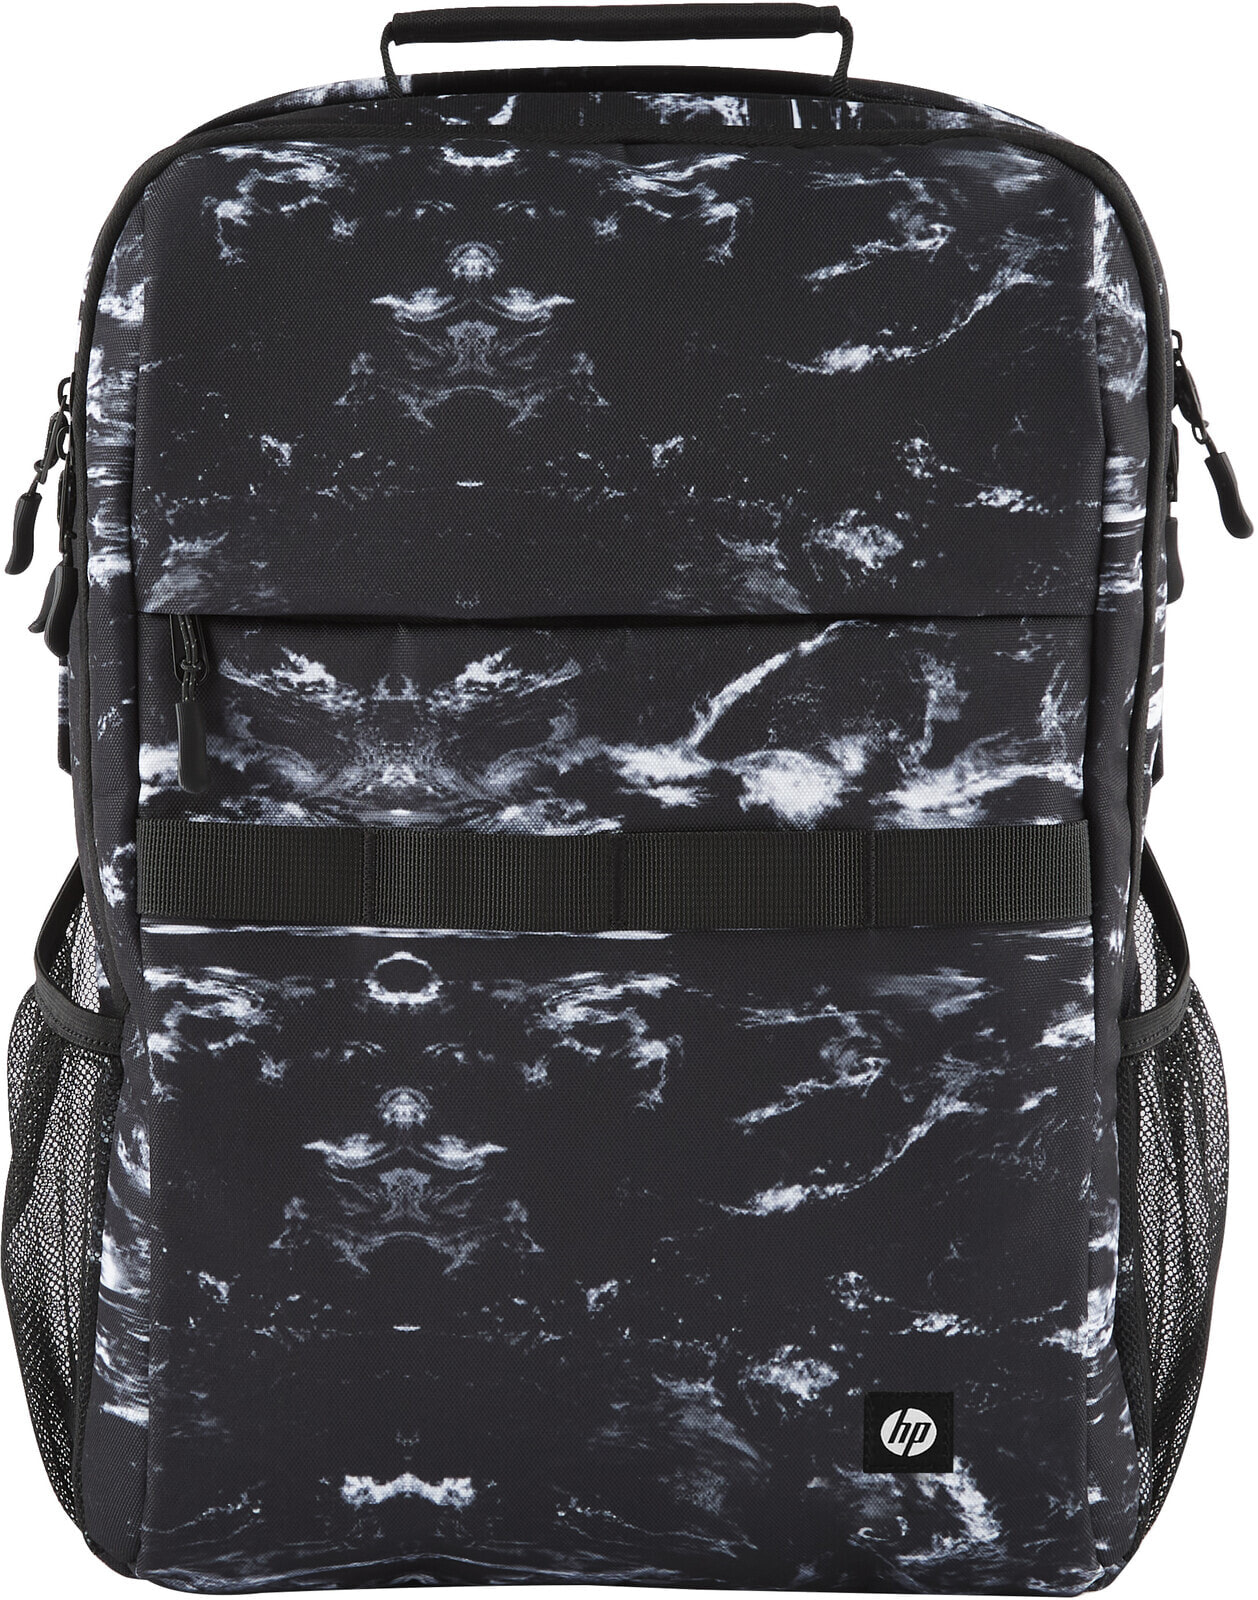 HP Campus XL Marble Stone Backpack - 40.9 cm (16.1